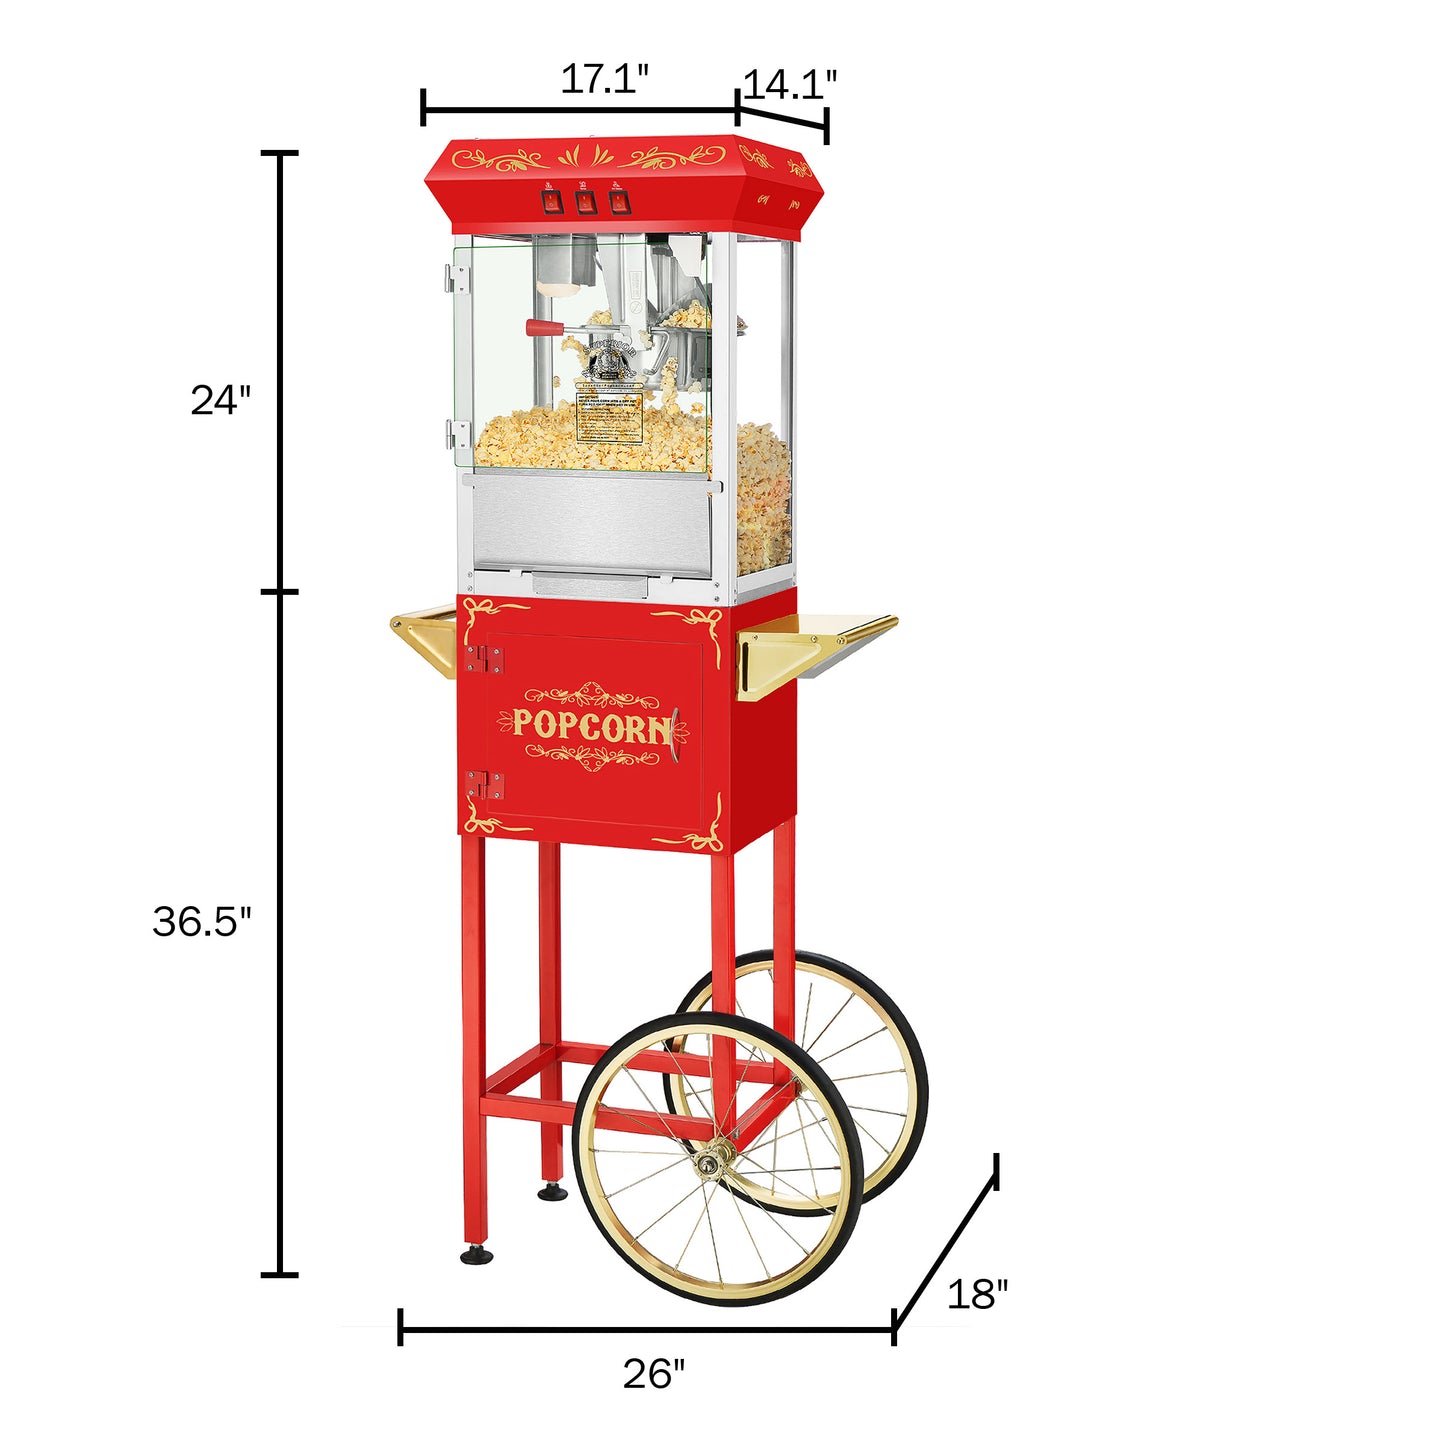 Movie Night Popcorn Machine with Cart and 8 Ounce Kettle - Red